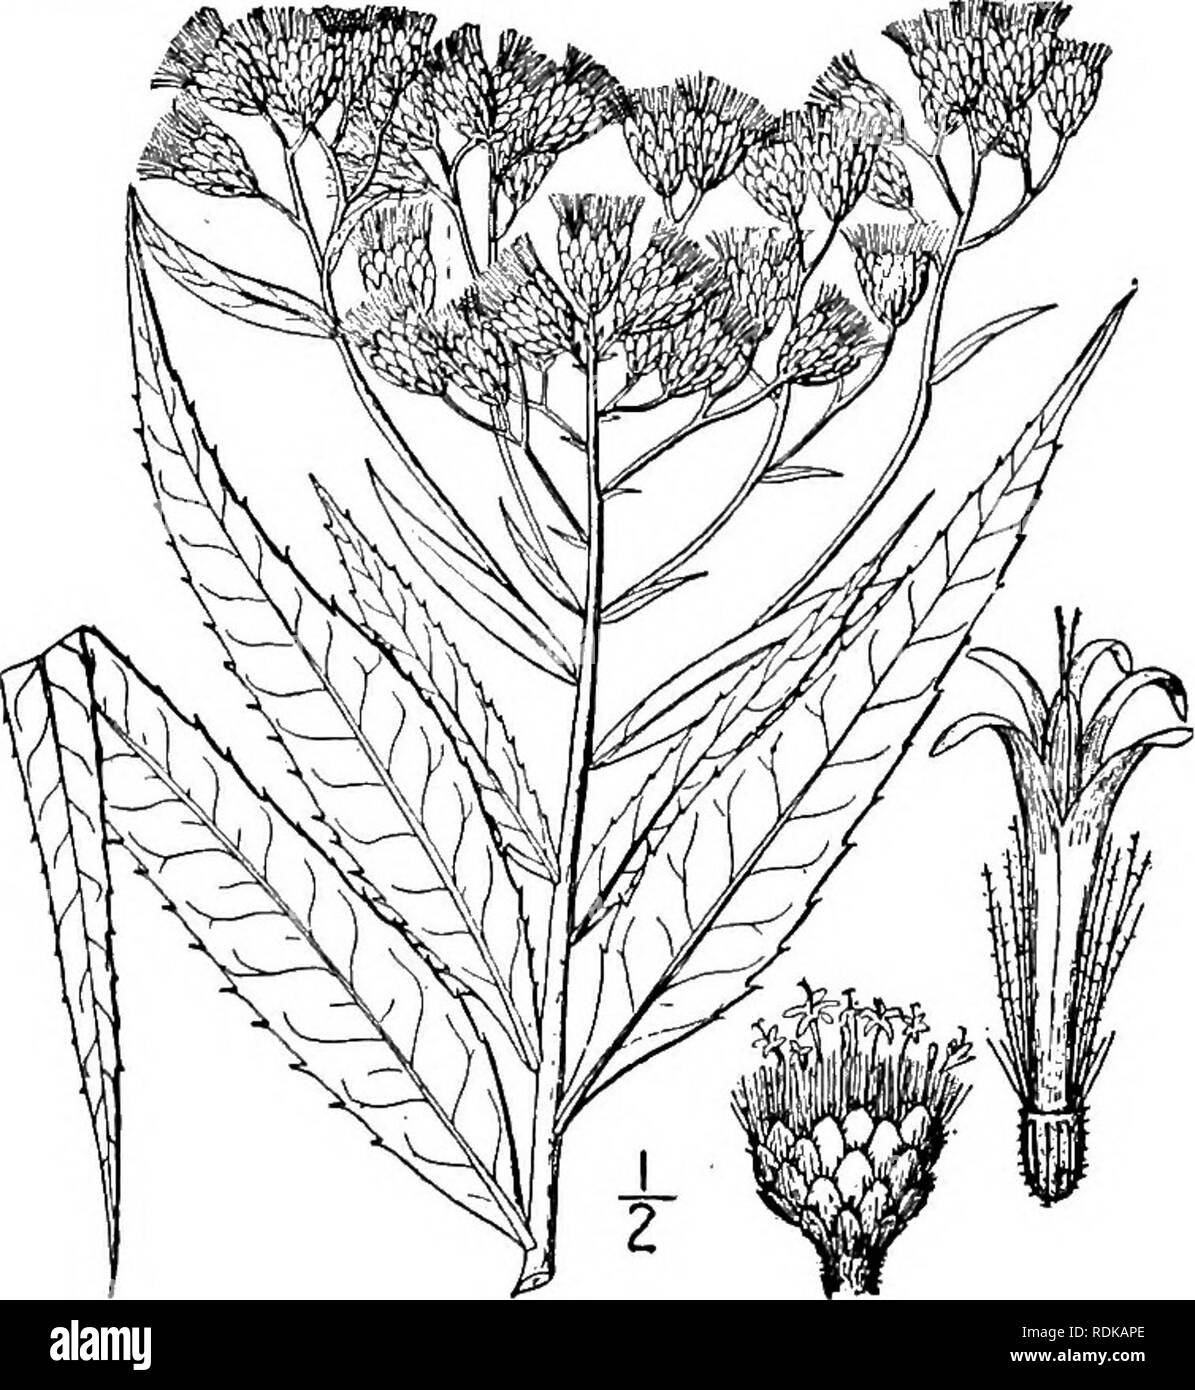 . An illustrated flora of the northern United States, Canada and the British possessions, from Newfoundland to the parallel of the southern boundary of Virginia, and from the Atlantic Ocean westward to the 102d meridian. Botany; Botany. 6. Vernonia fasciculata Michx. Western Iron-weed. Fig. 4145. Vernonia fasciculata Michx. Fl. Bor. Am. 2: 94. 1803. Cacalia fasciculata Kuntze, Rev. Gen. PI. 970. 1891. Glabrous, or puberulent above, 2°-6° high. Leaves firm, lanceolate or linear-lanceolate, long-acuminate, 3'-6' long, a&quot;-4&quot; wide, gla- brous or nearly so on both surfaces; inflor- escenc Stock Photo